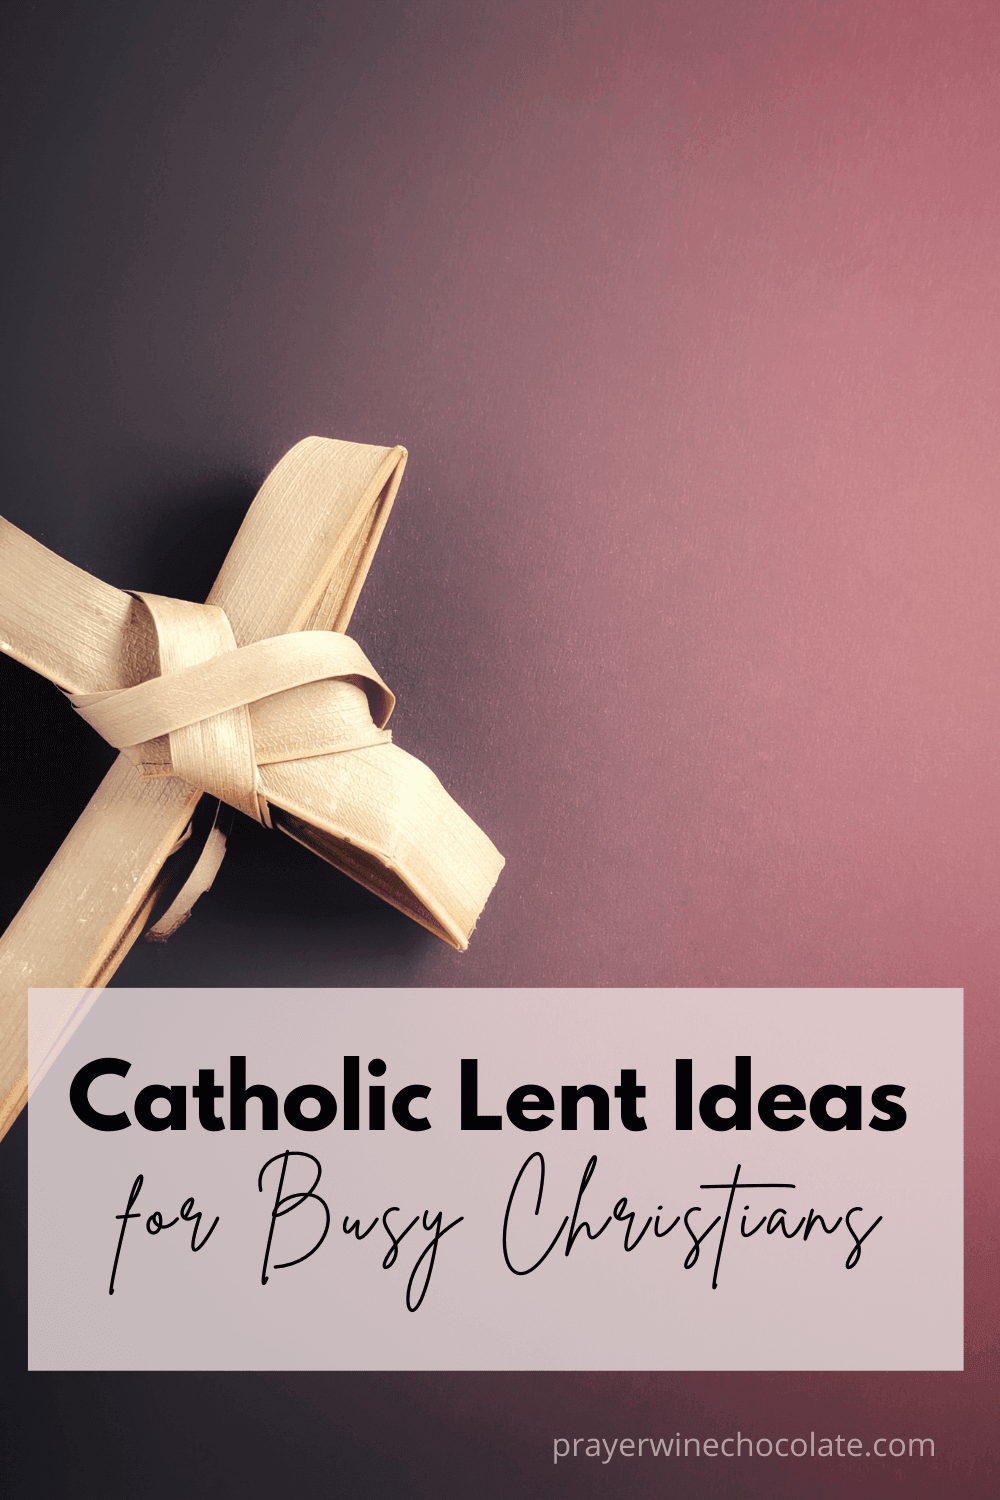 Catholic Lent Ideas Pinnable image, has a cross made out of palms and title